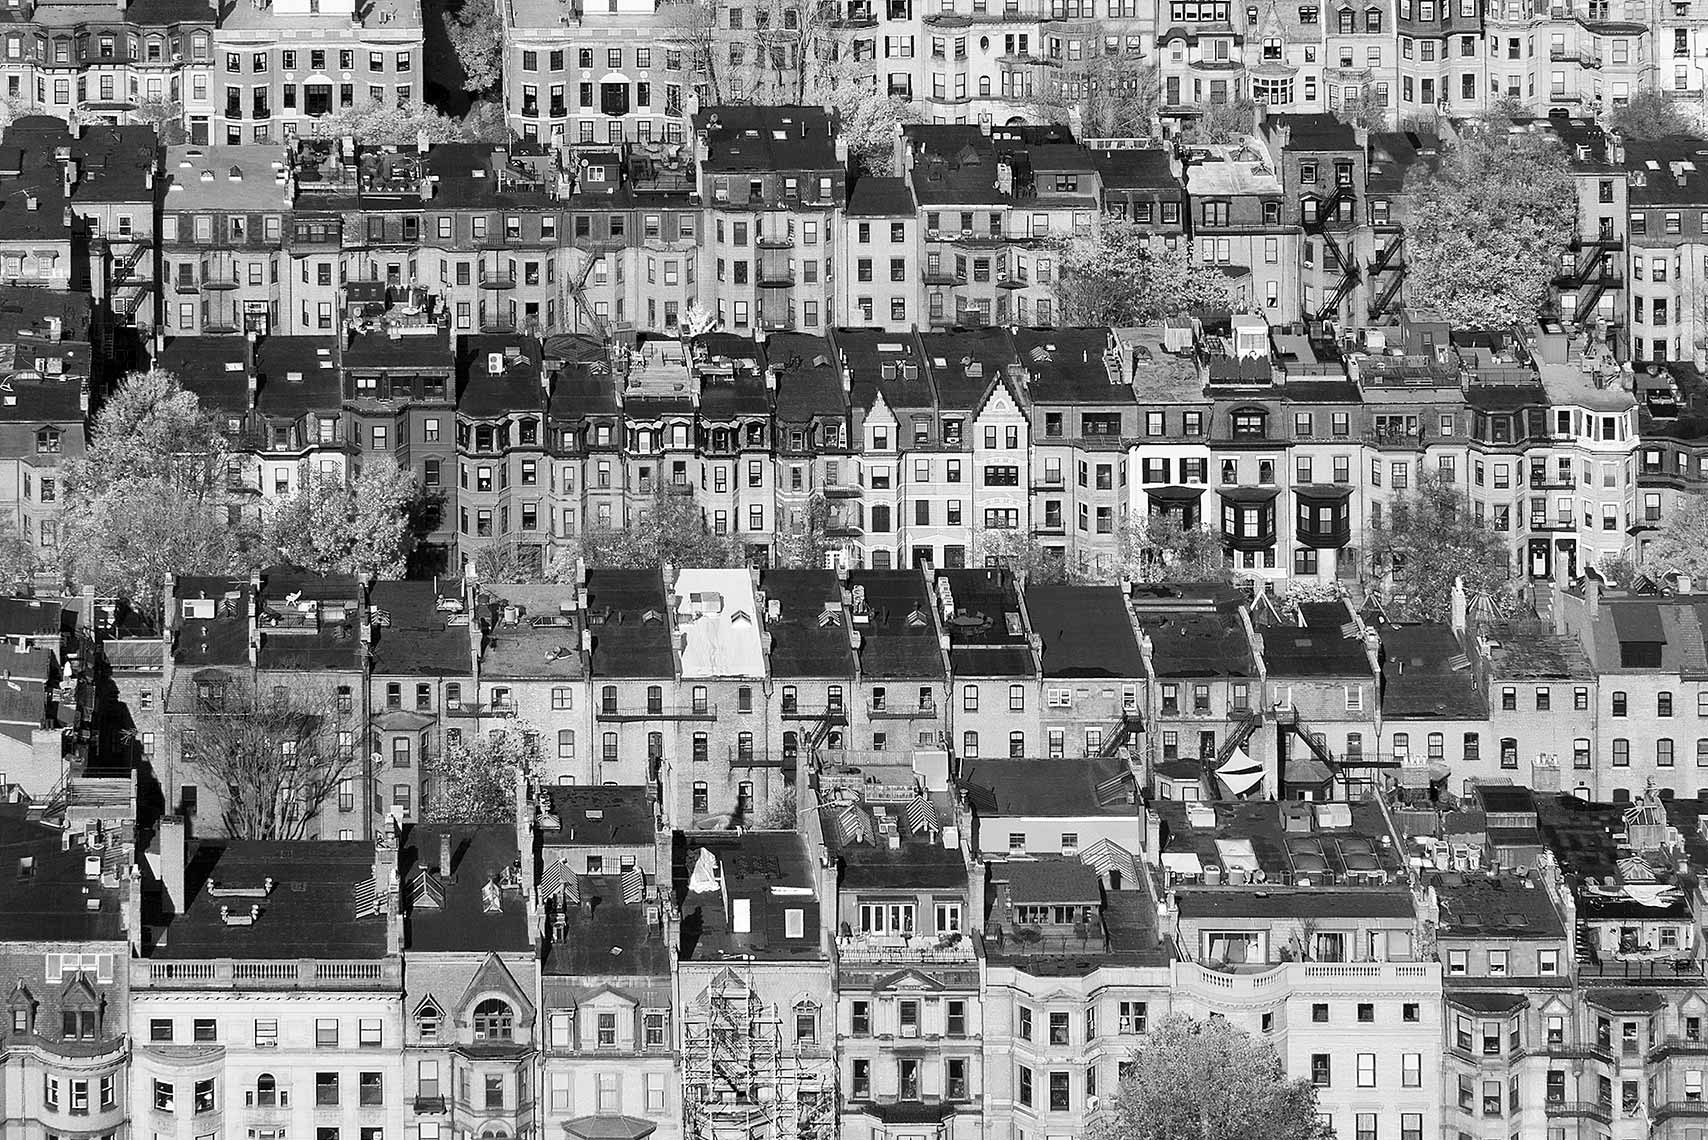 Zoe Wetherall / Aerial Cityscape / Boston Houses